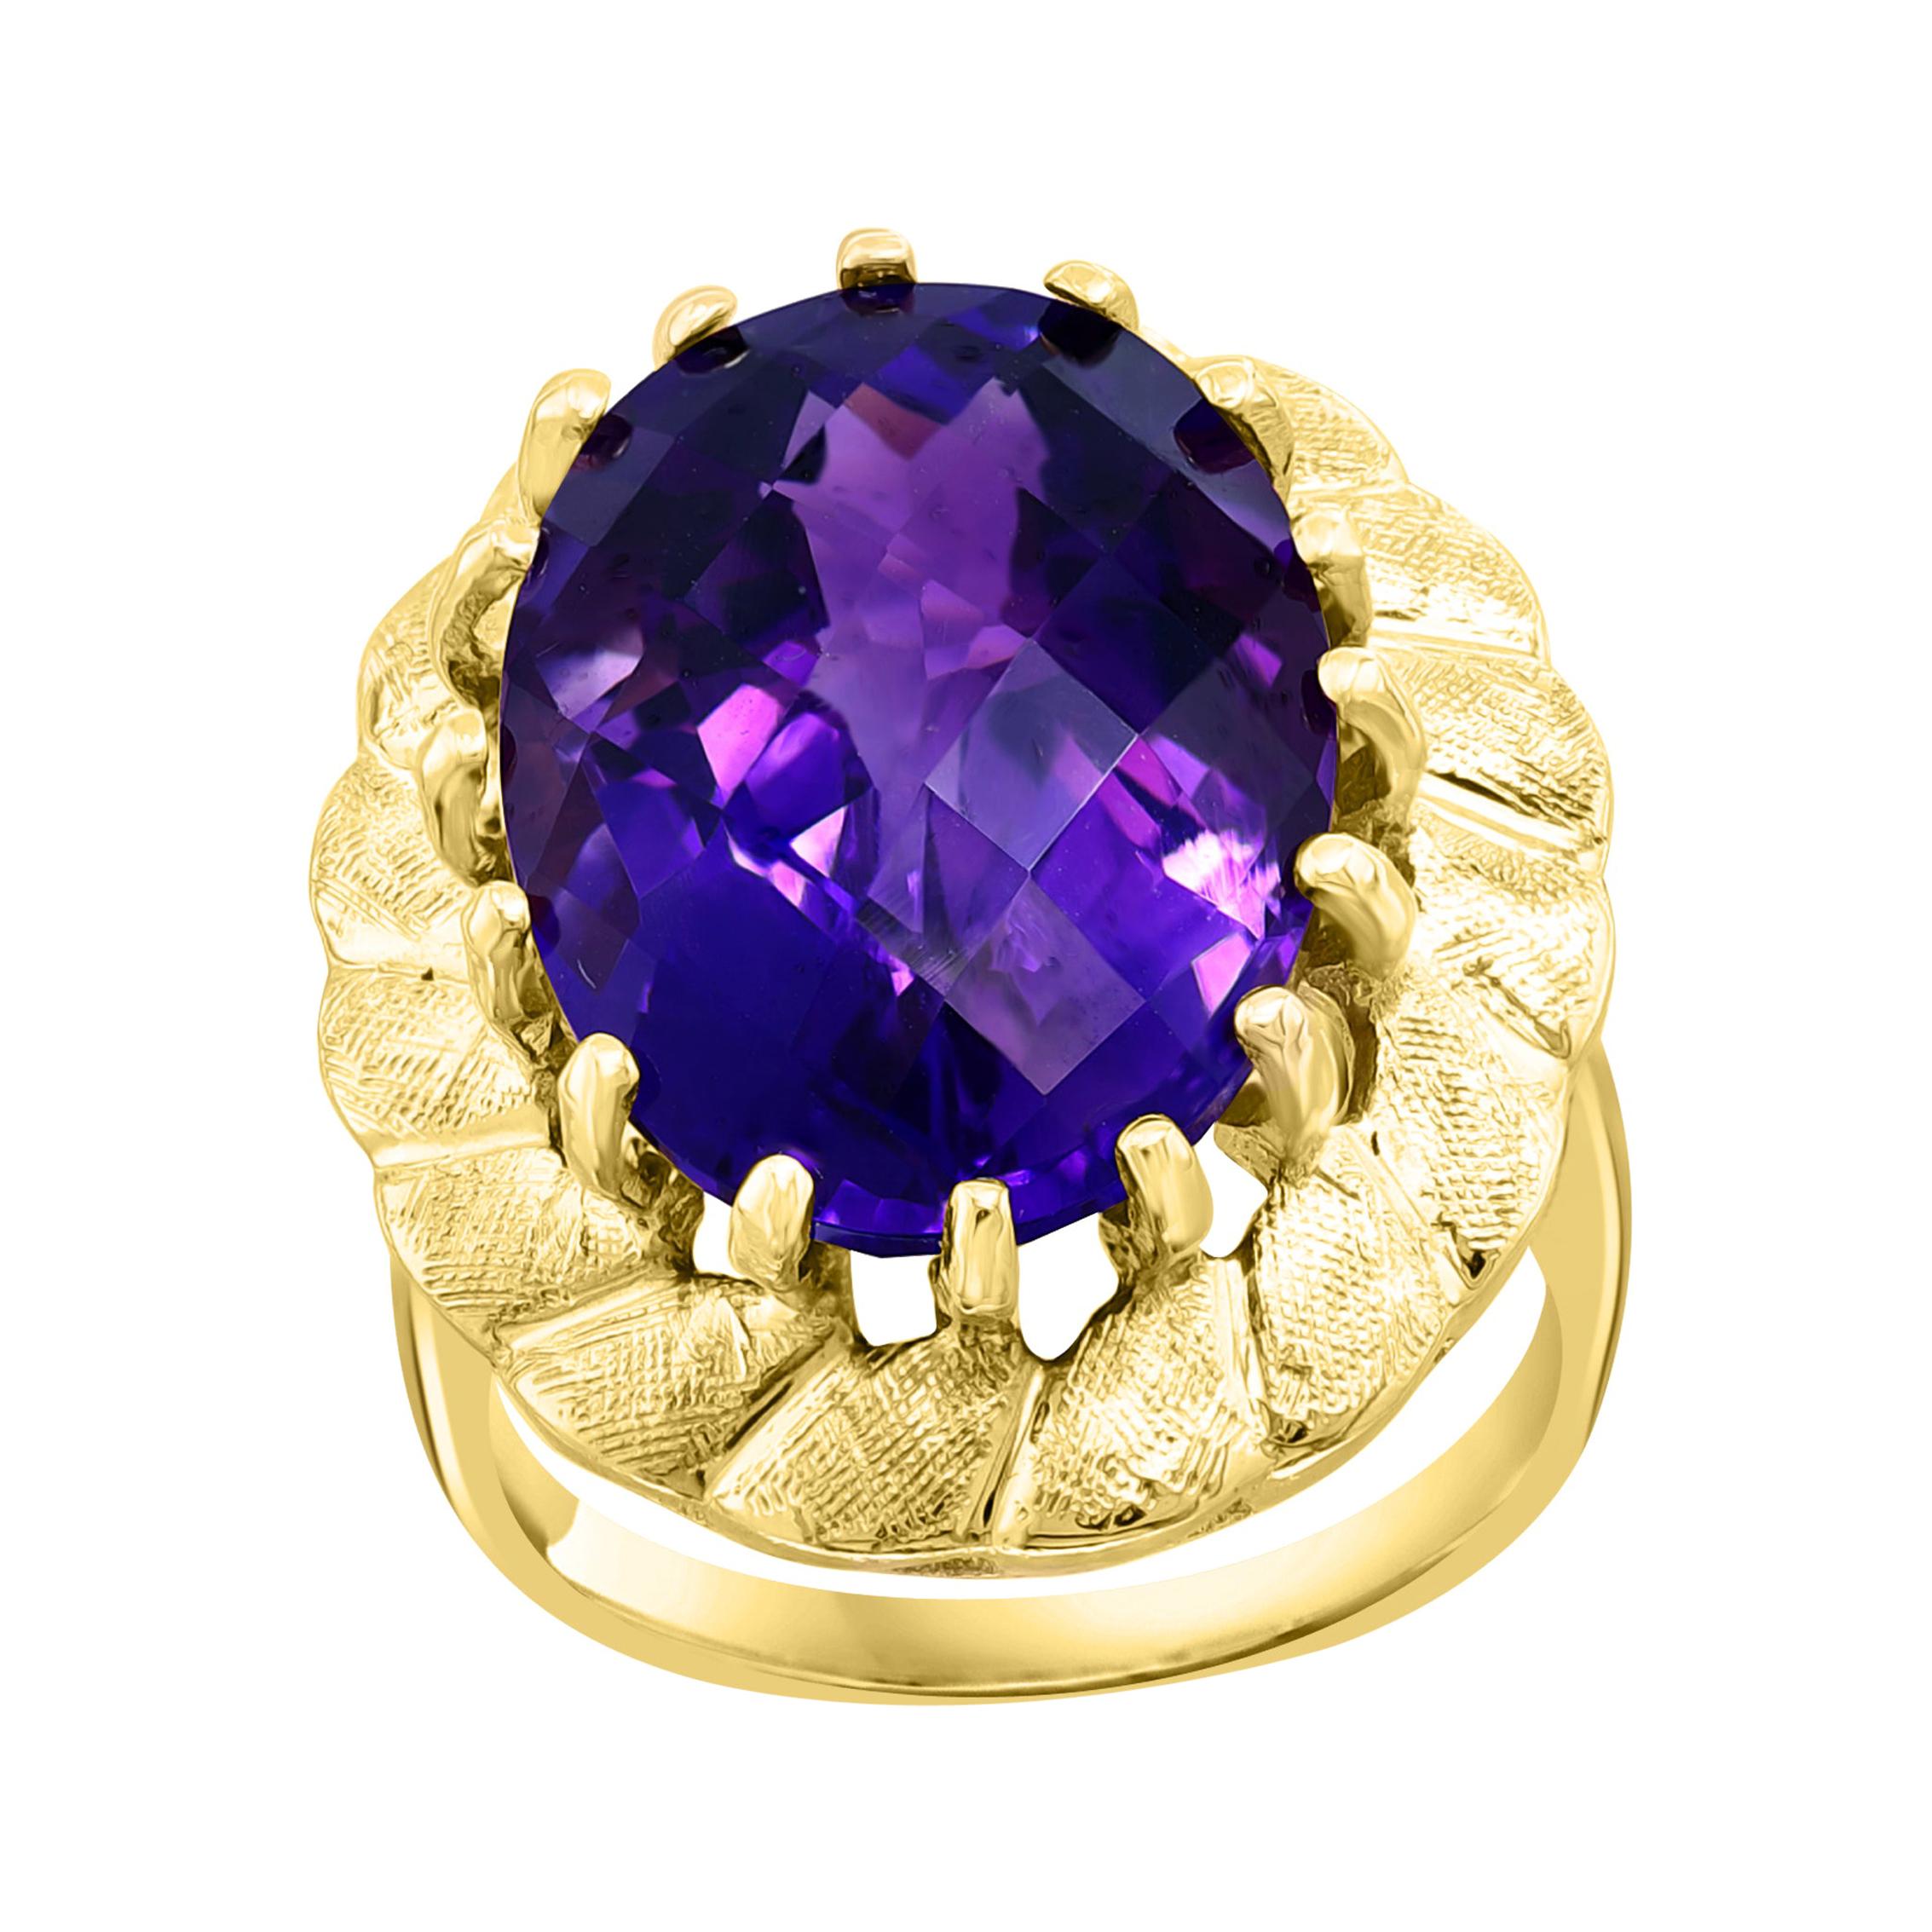 10 Carat Checker Board Amethyst Cocktail Ring in 14 Karat Yellow Gold For Sale